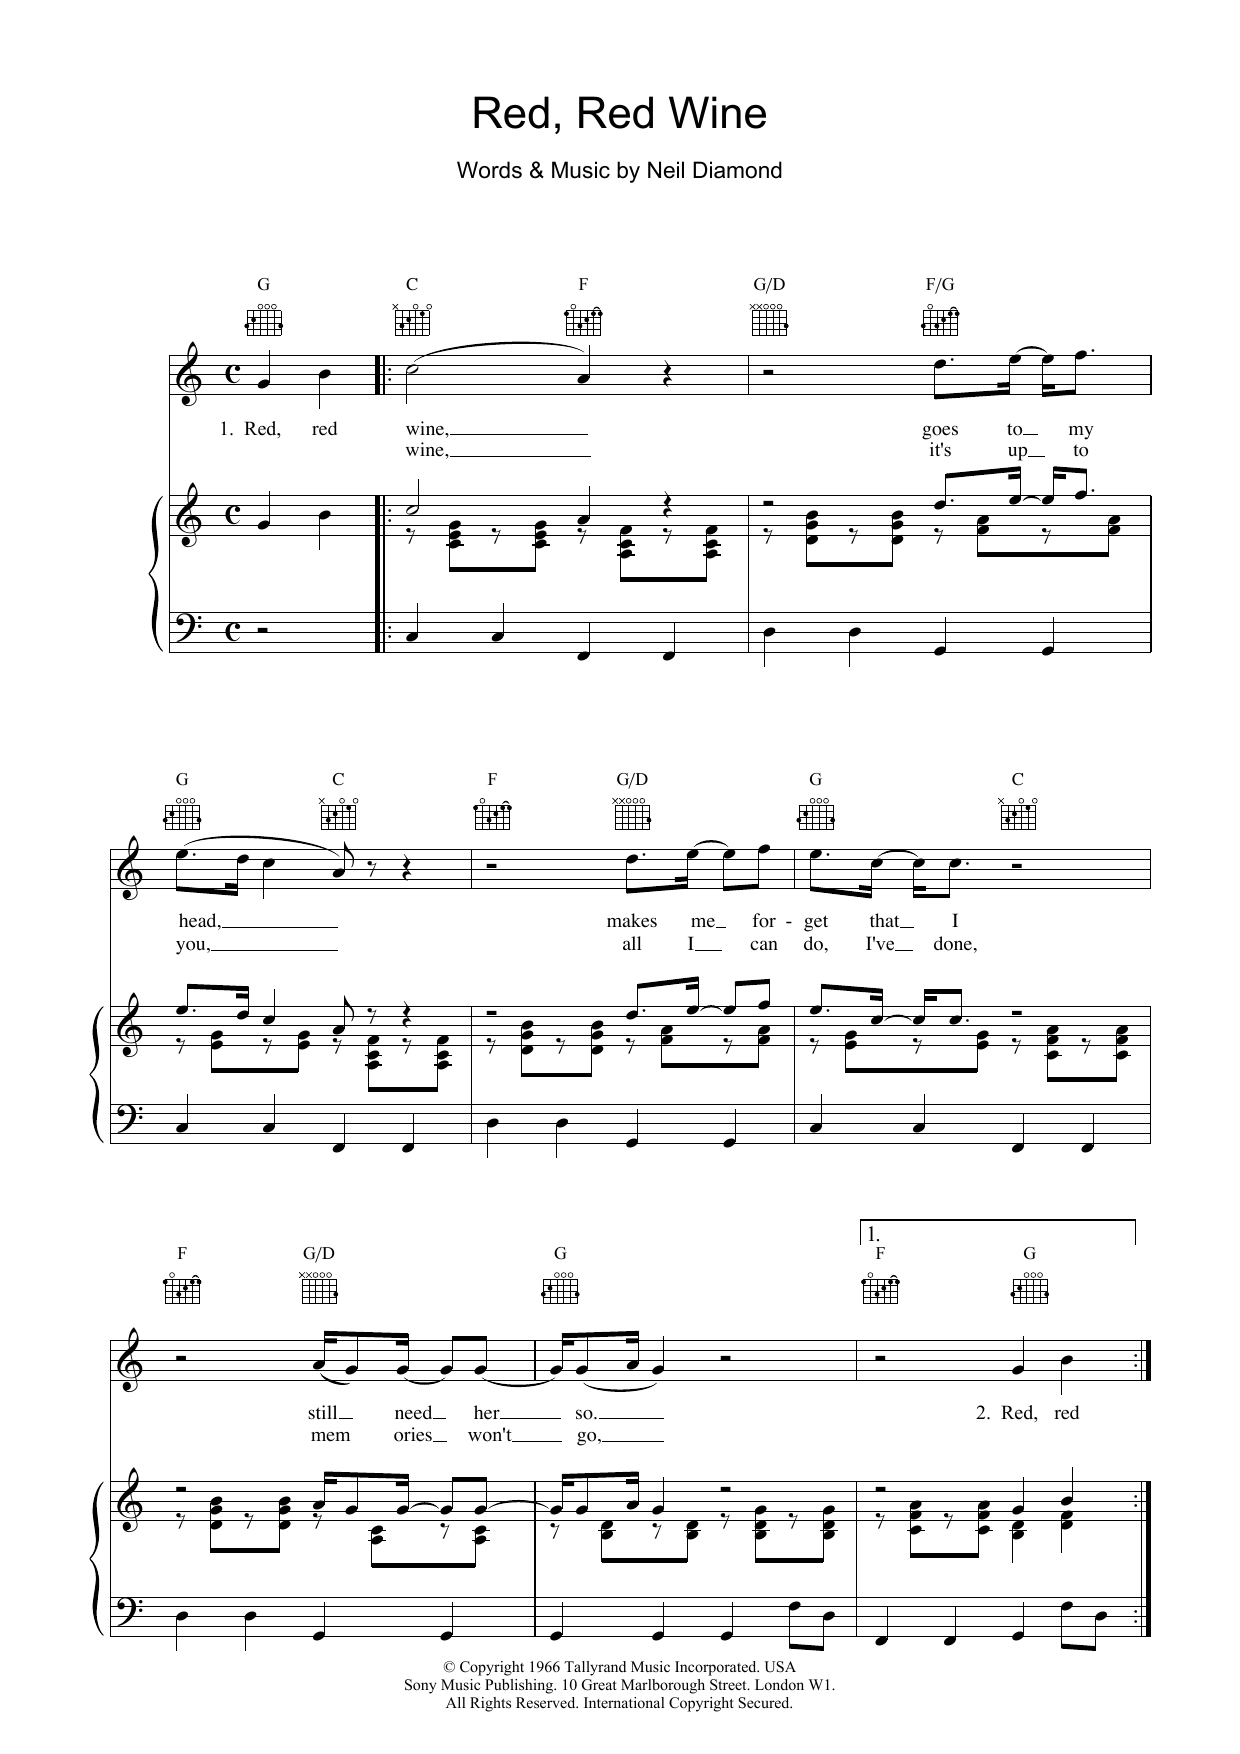 UB40 "Red, Wine" Sheet Music PDF Notes, Chords | Pop Score Piano, Vocal & Guitar (Right-Hand Melody) Download Printable. SKU: 17137